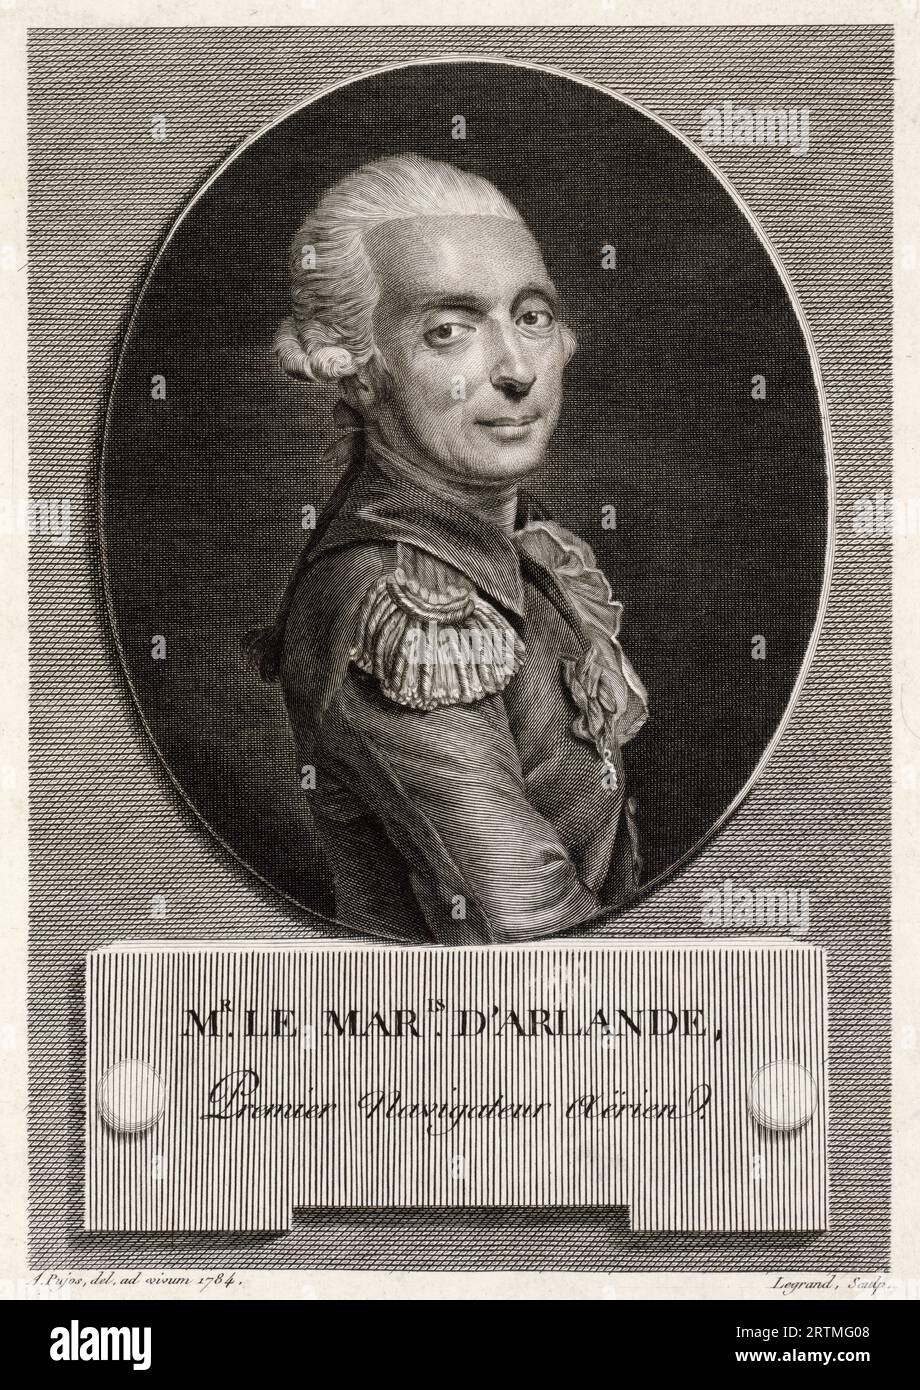 François Laurent d'Arlandes (1742-1809), Marquis d'Arlandes, was a French soldier and a pioneer of hot air ballooning, portrait engraving by Legrand after André Pujos, 1780-1790 Stock Photo